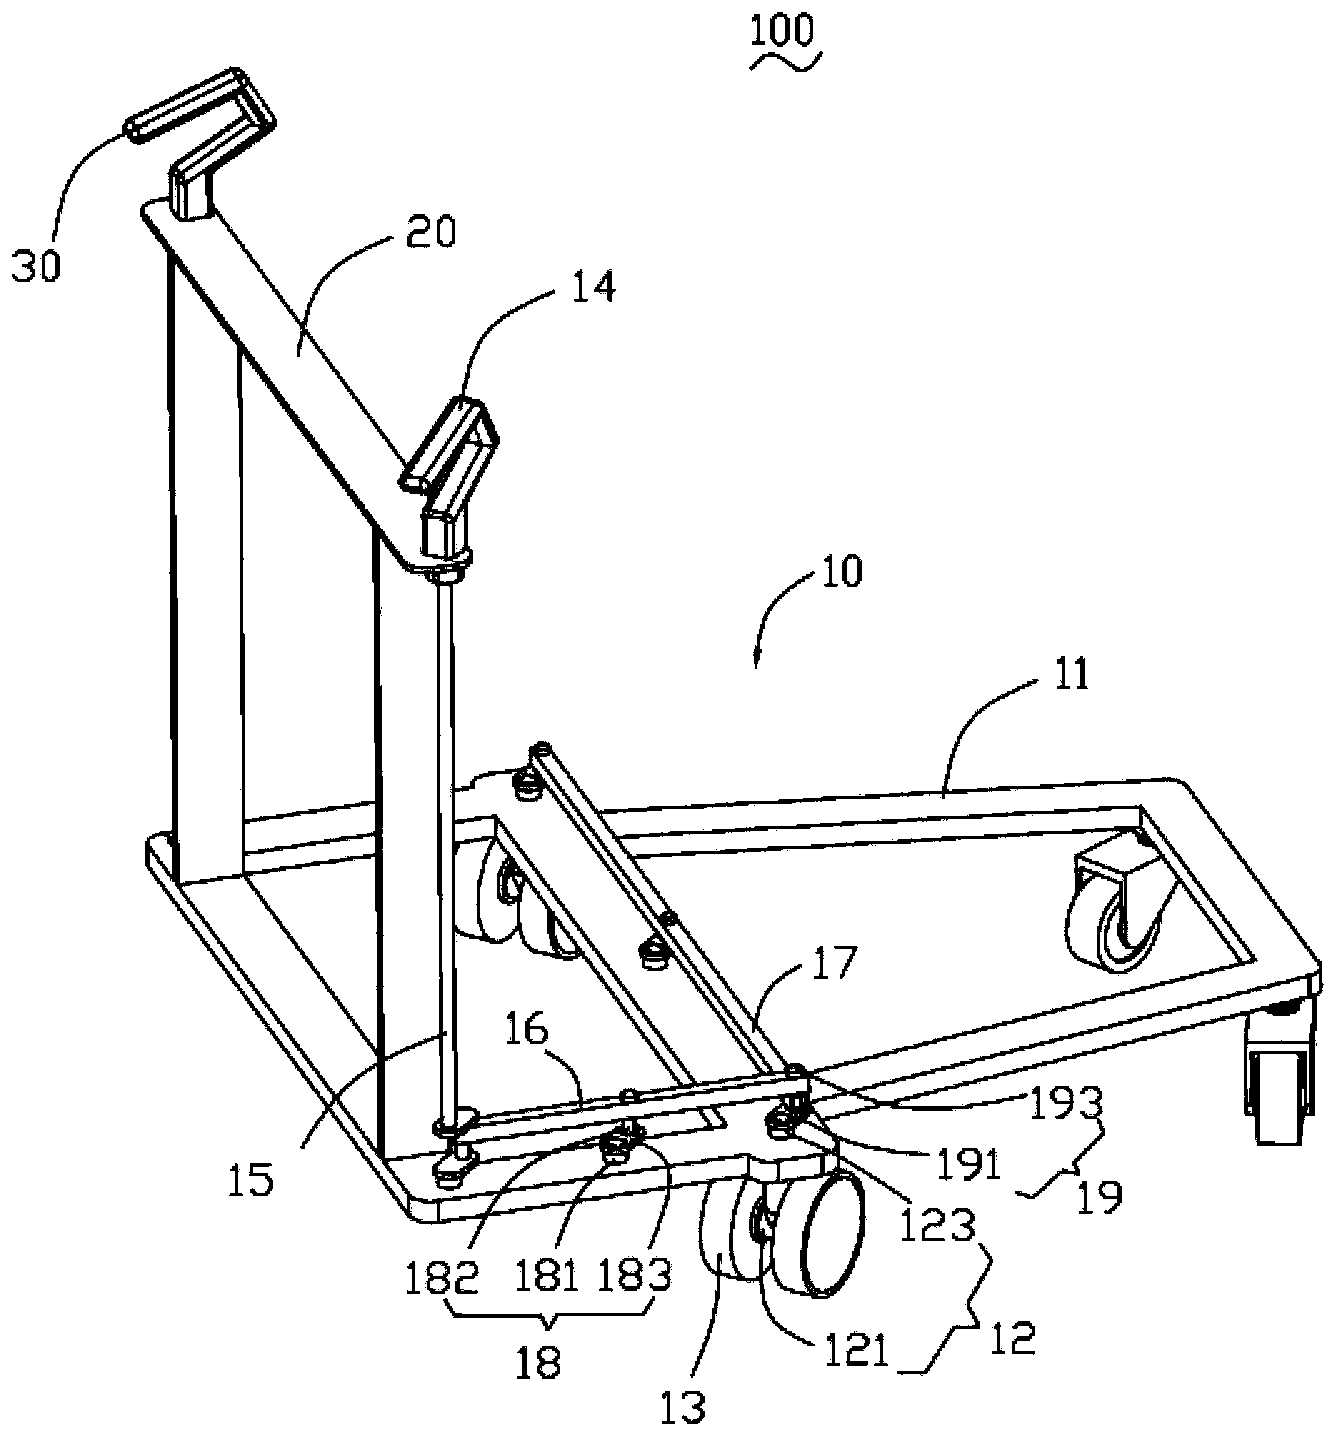 Steering mechanism, omnidirectional traveling chassis and trolley